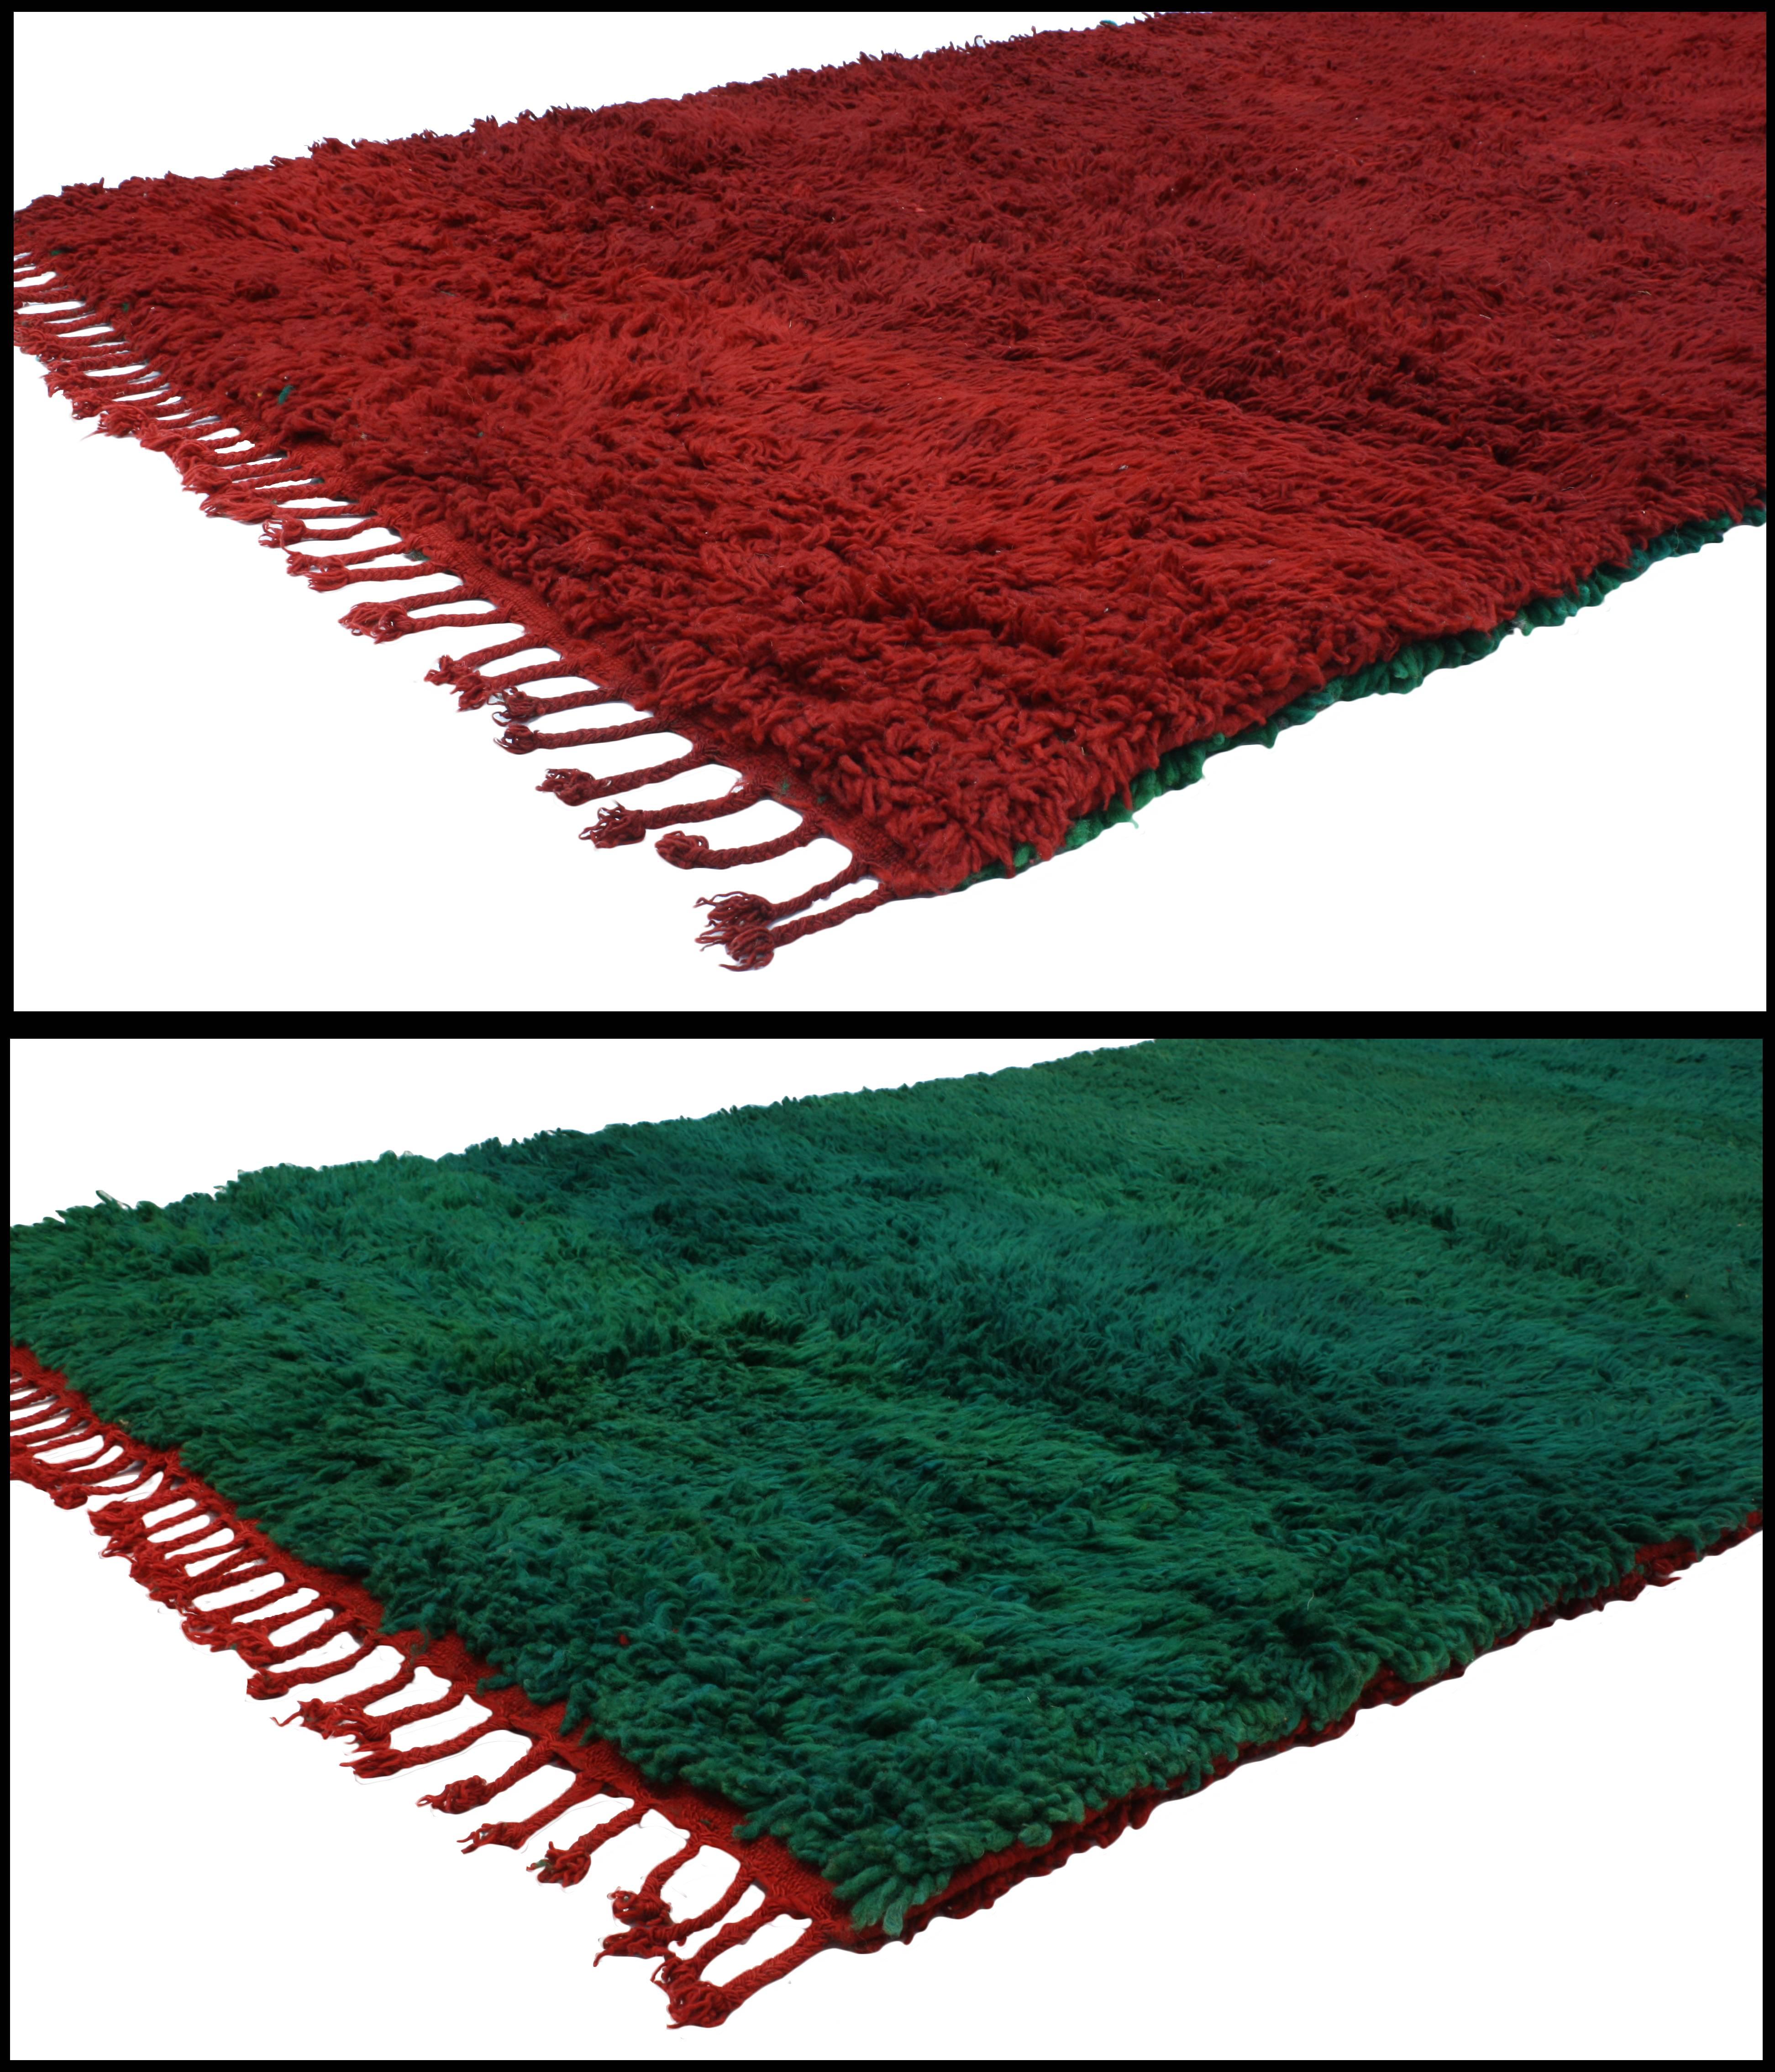 20515 Vintage Beni Mguild Moroccan Rug, Berber Moroccan Reversible Rug 06'03 x 11'00. From ravishing red to malachite madness, this reversible Mid-Century style Modern Beni Mguild Moroccan rug is bold and fashionably sleek. Featuring rich waves of